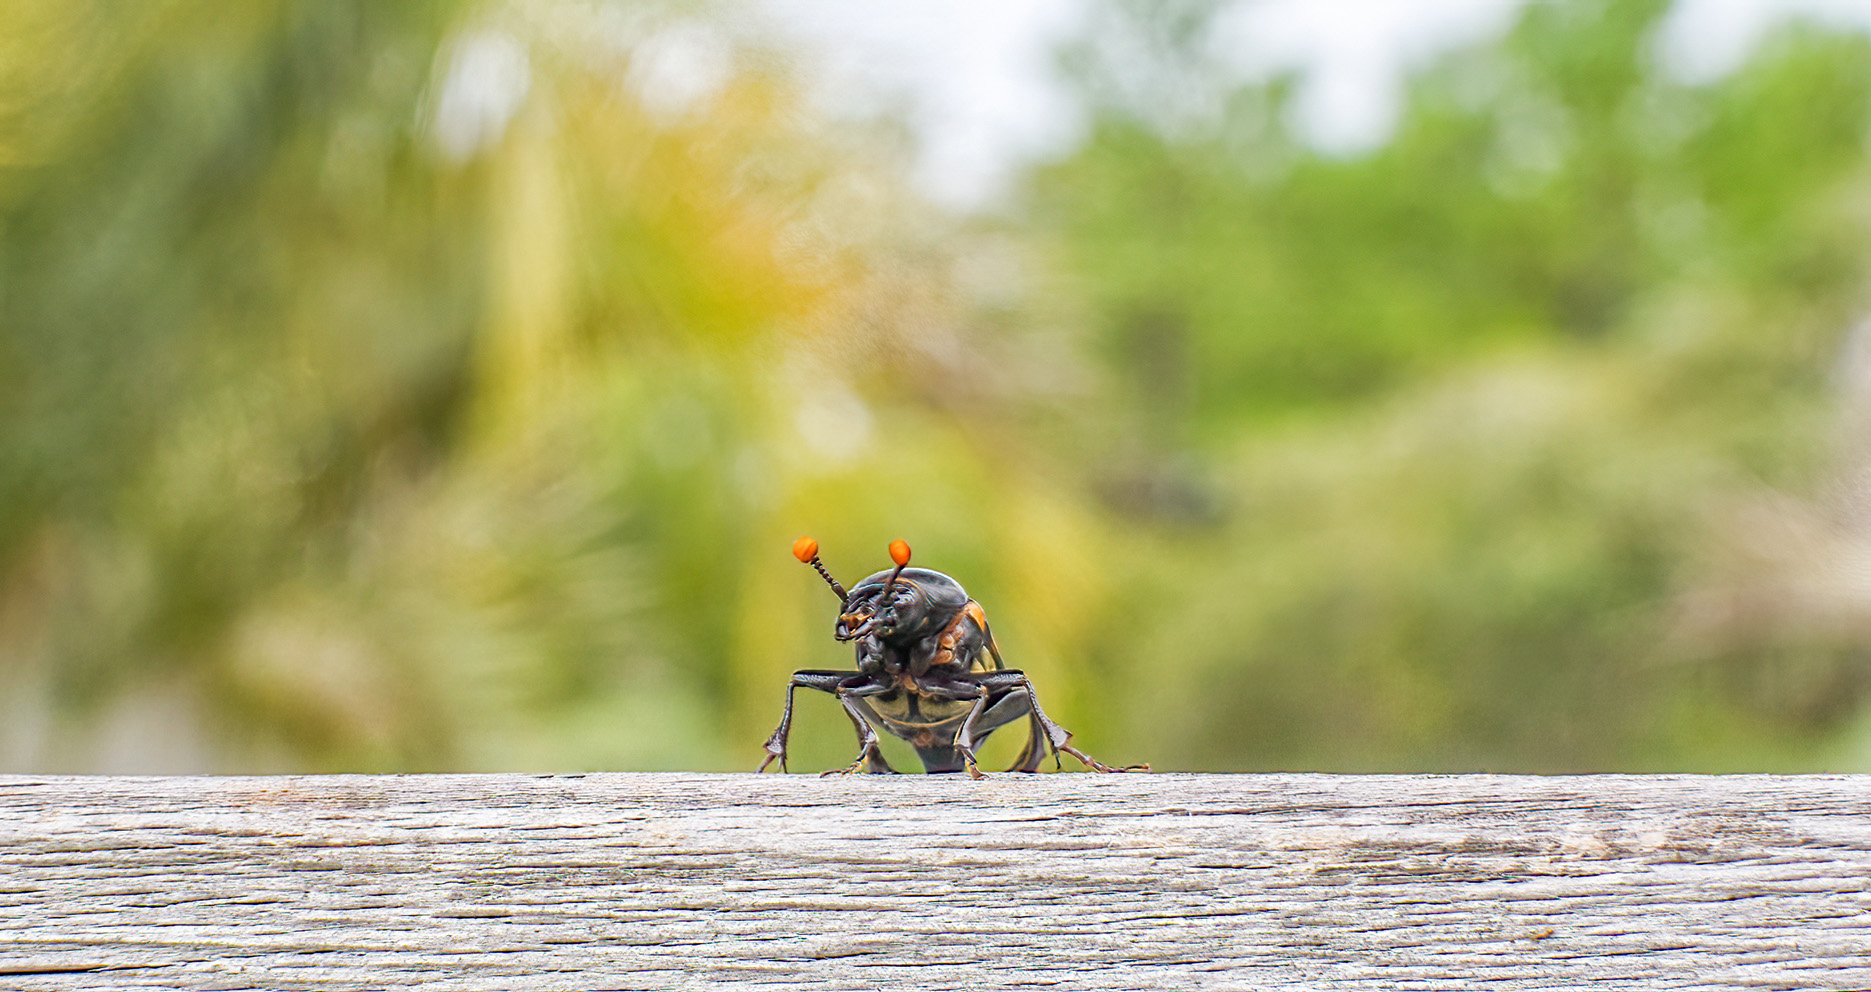 Close up of the federally endangered American burying beetle perched on a log